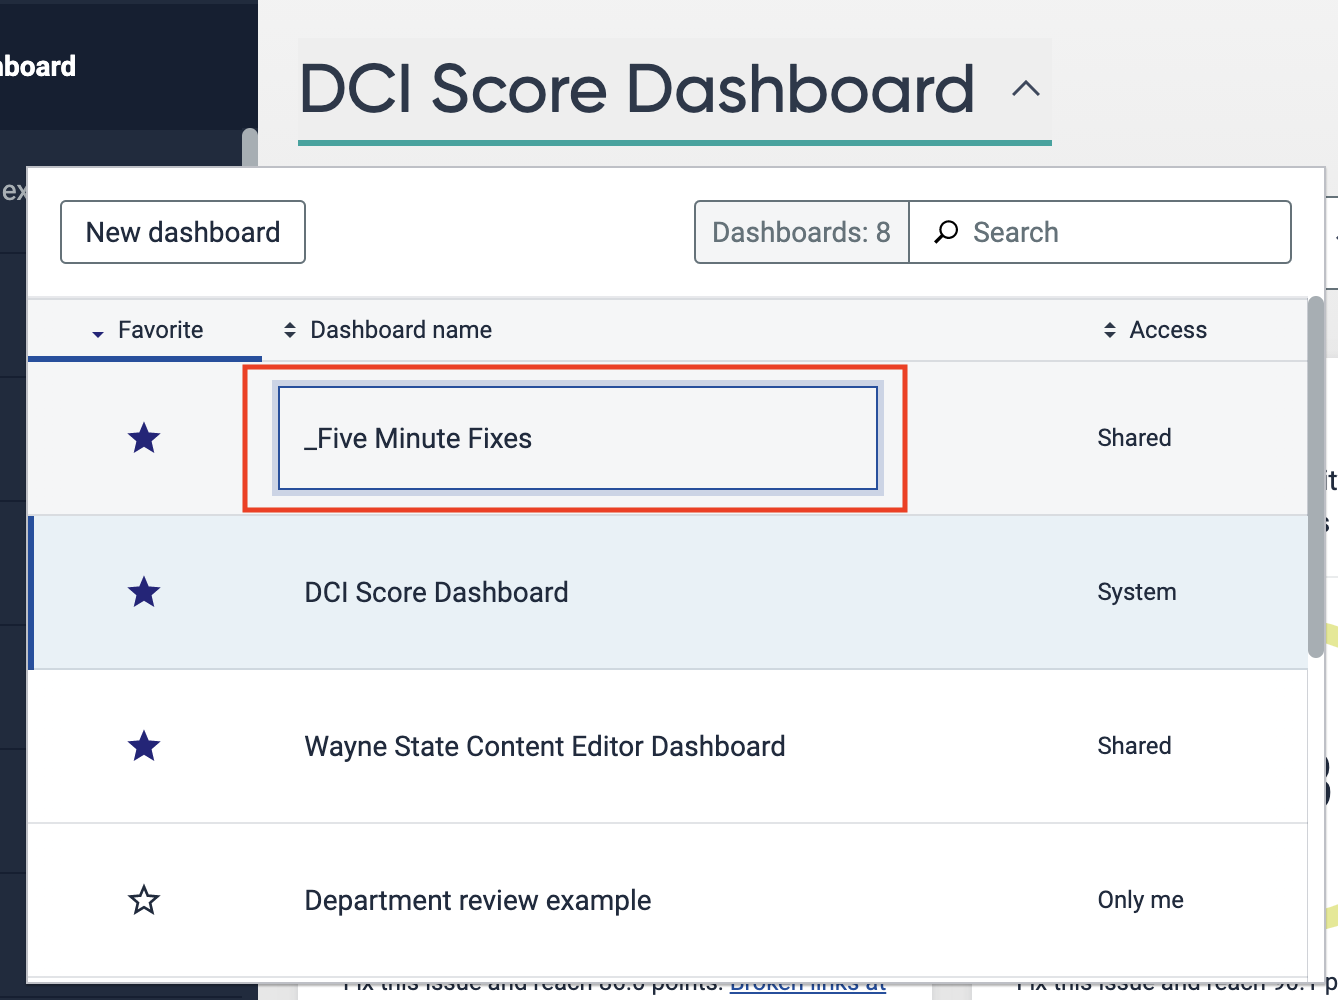 Dropdown with _Five Minute Fixes highlighted to select the dashboard